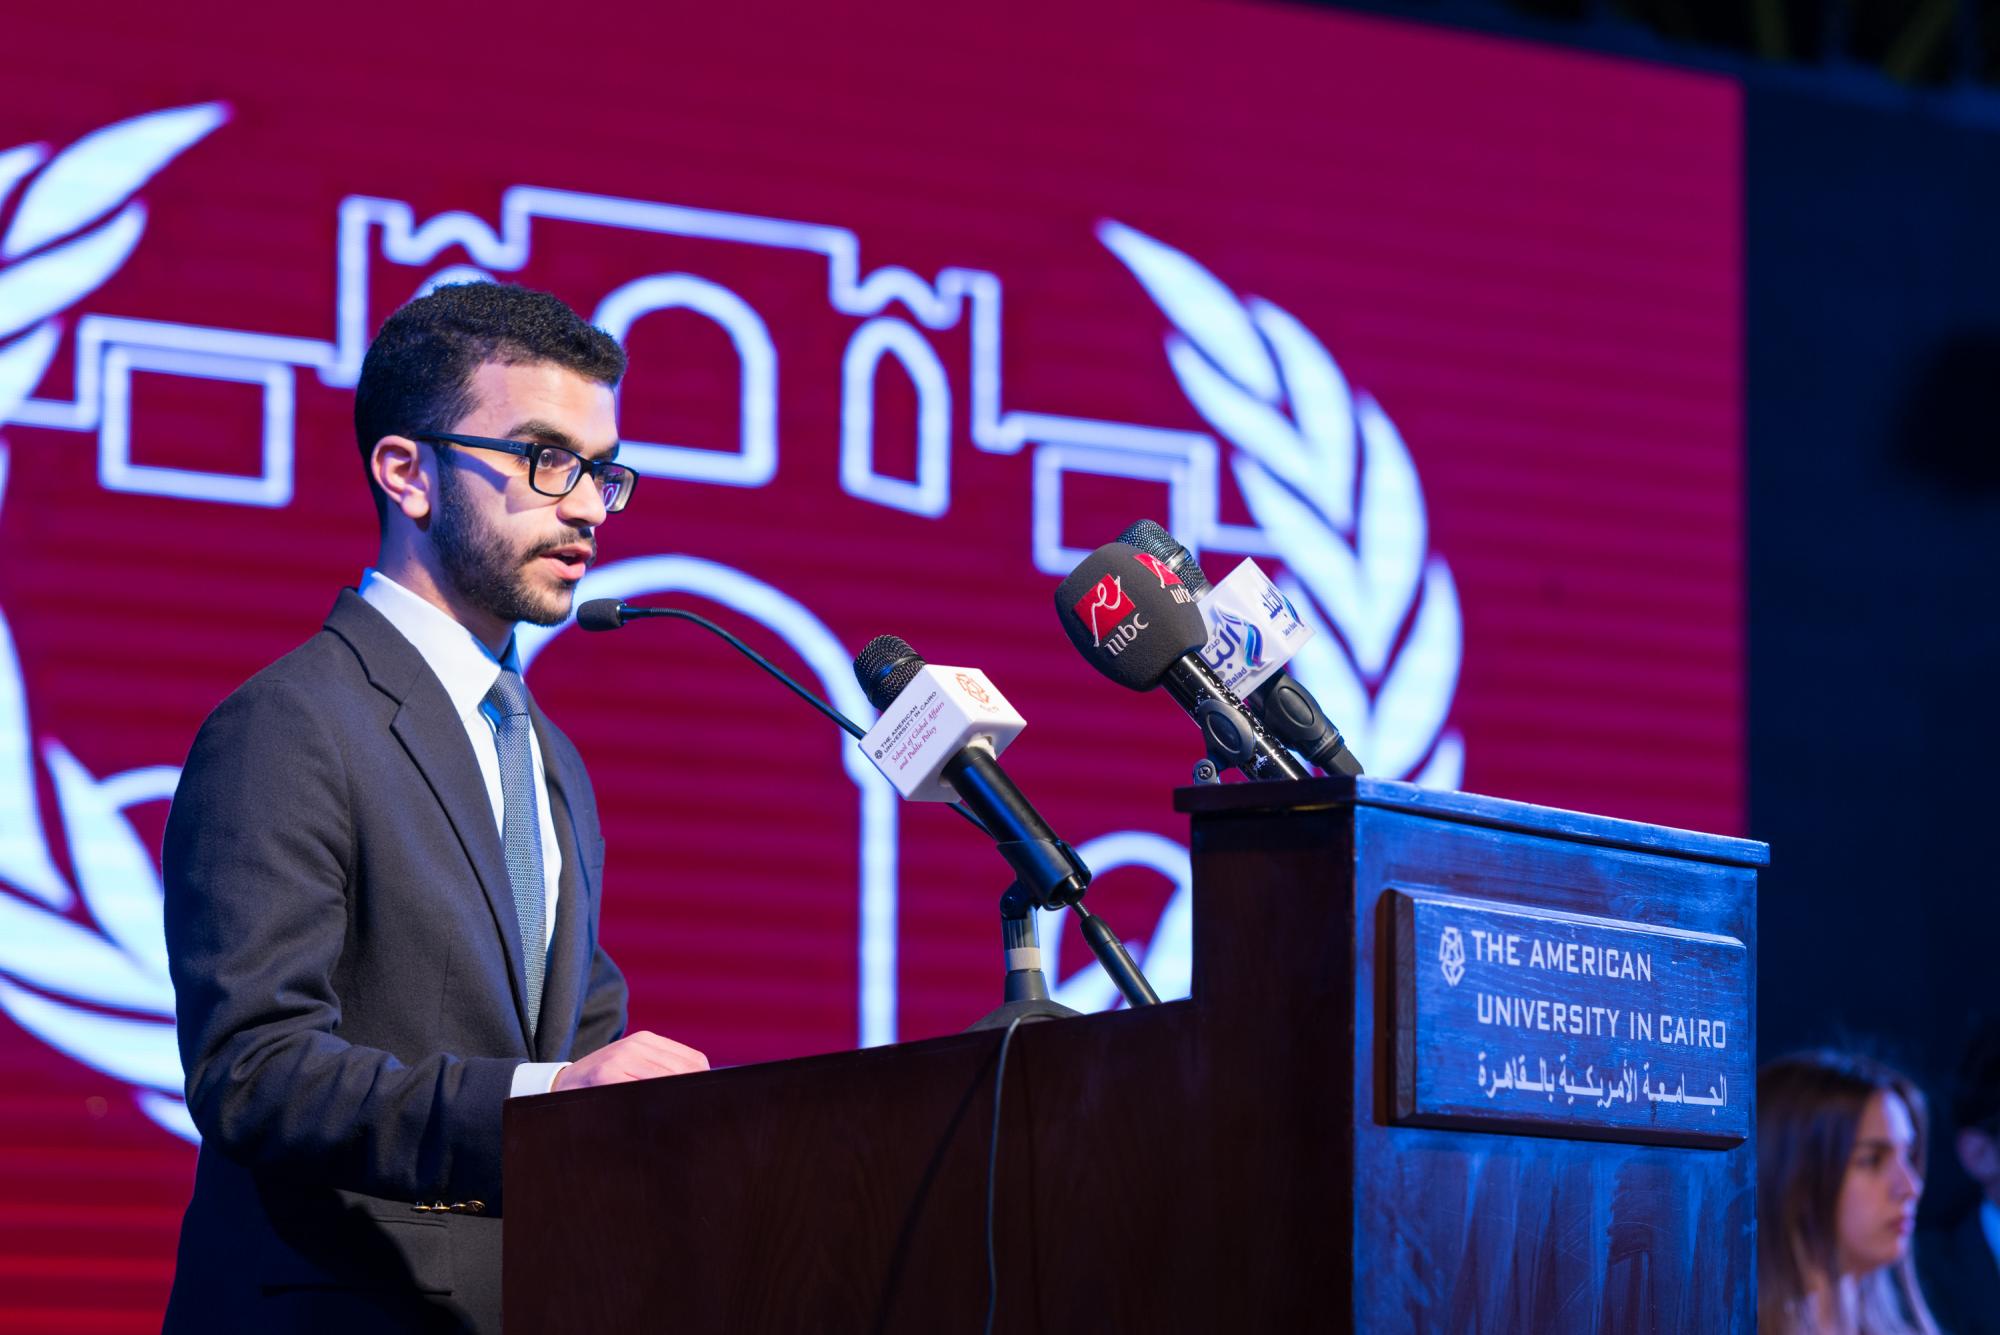 CIMUN's secretary-general speaks at the opening ceremony